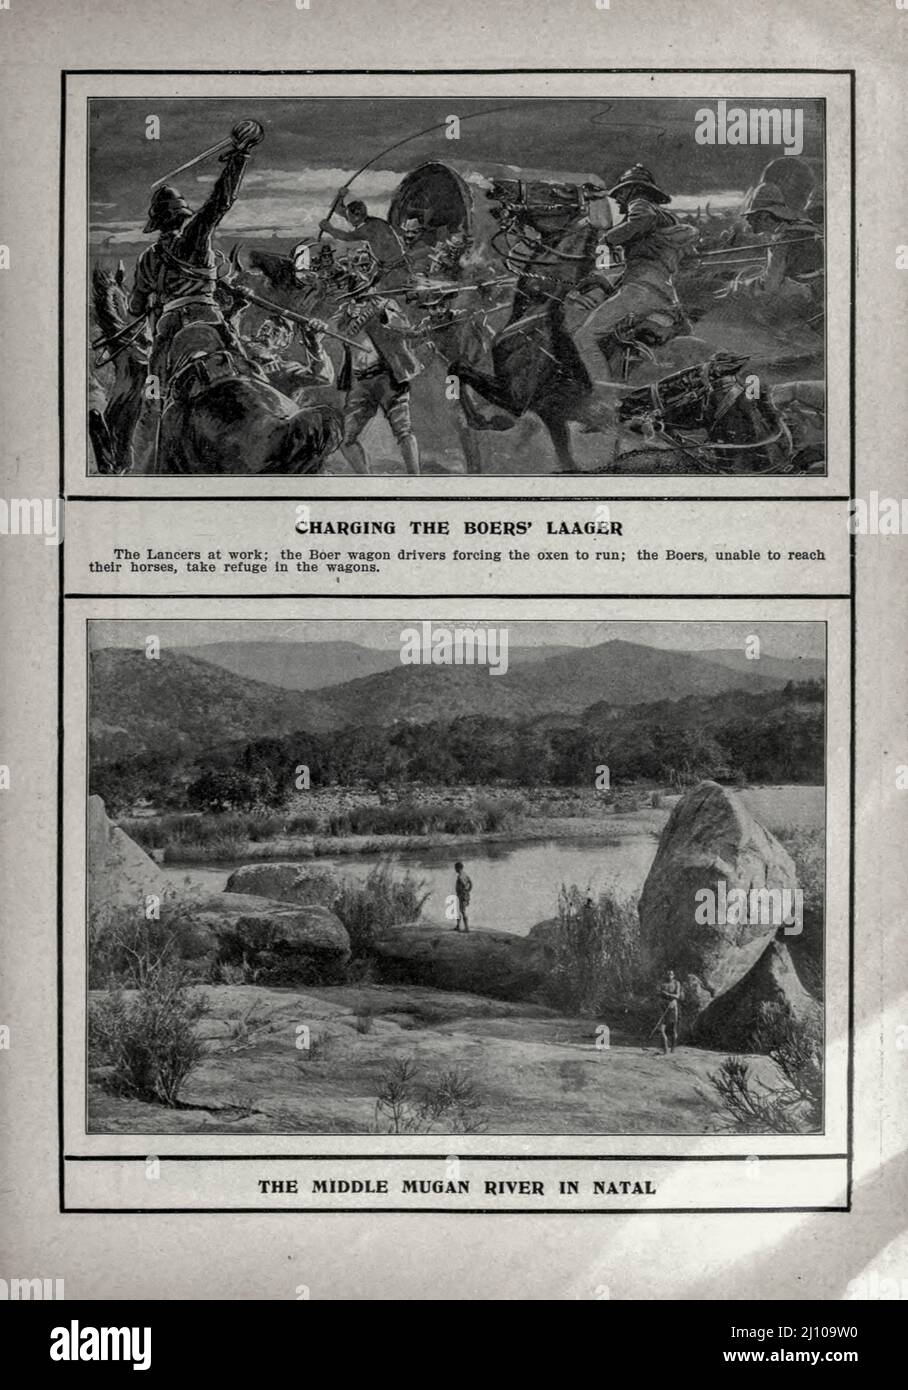 Charging the Boers' Laager (Top) The Middle Mugan River Natal Black and white photograph from the book ' South Africa; its history, heroes and wars ' by William Douglas Mackenzie, and Alfred Stead, Publisher Chicago, Philadelphia : Monarch Book Company in 1890 Stock Photo